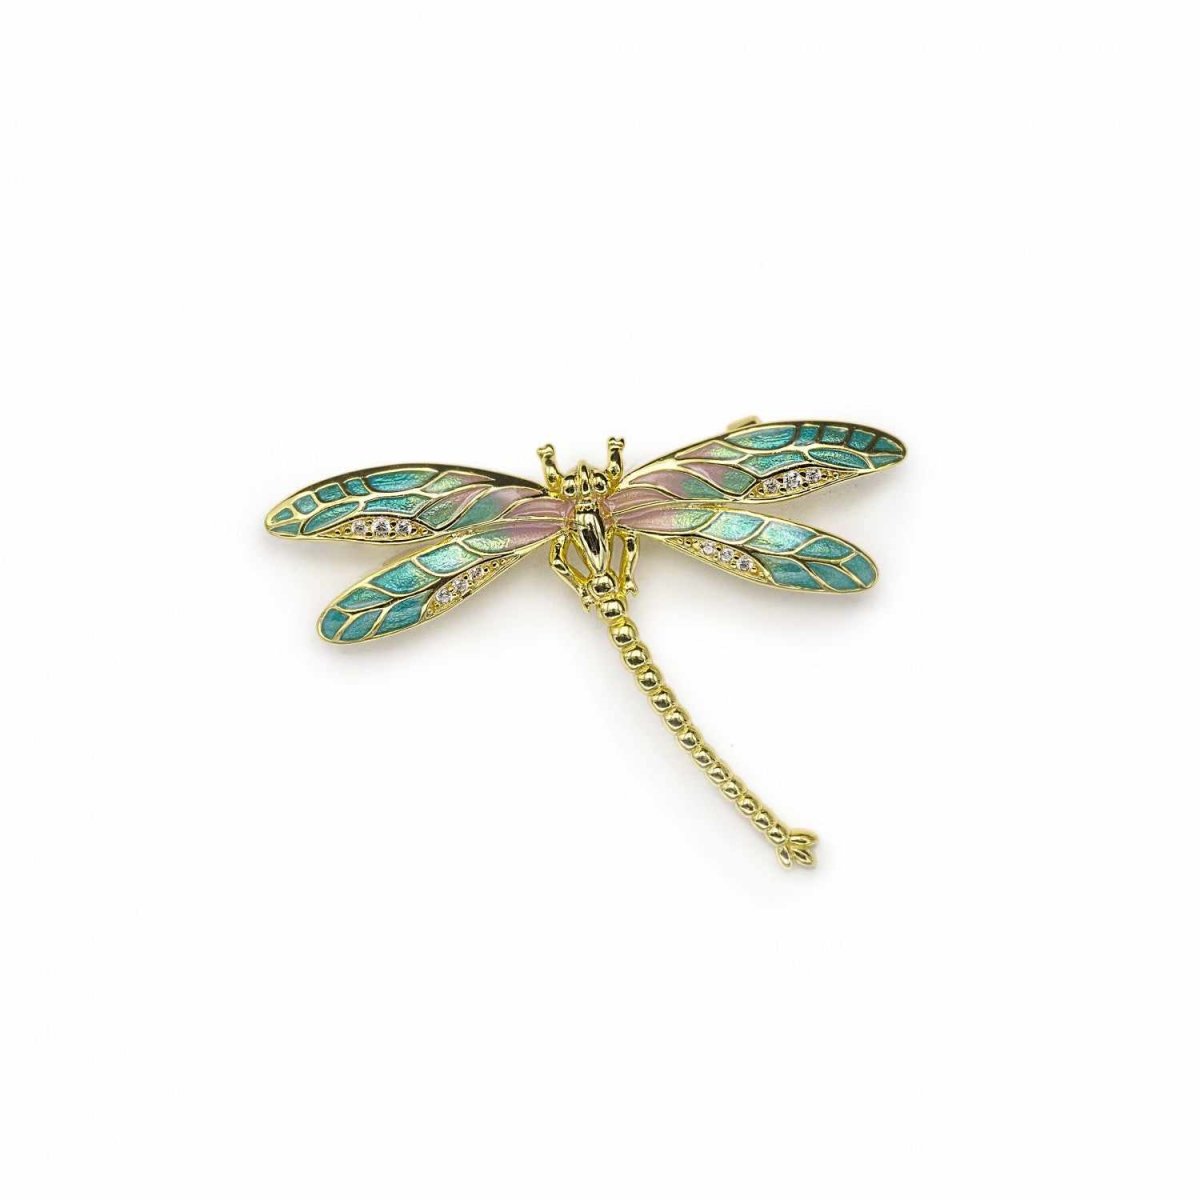 Brooch - Gold plated silver brooch with a dragonfly design composed of pink and green zirconias.